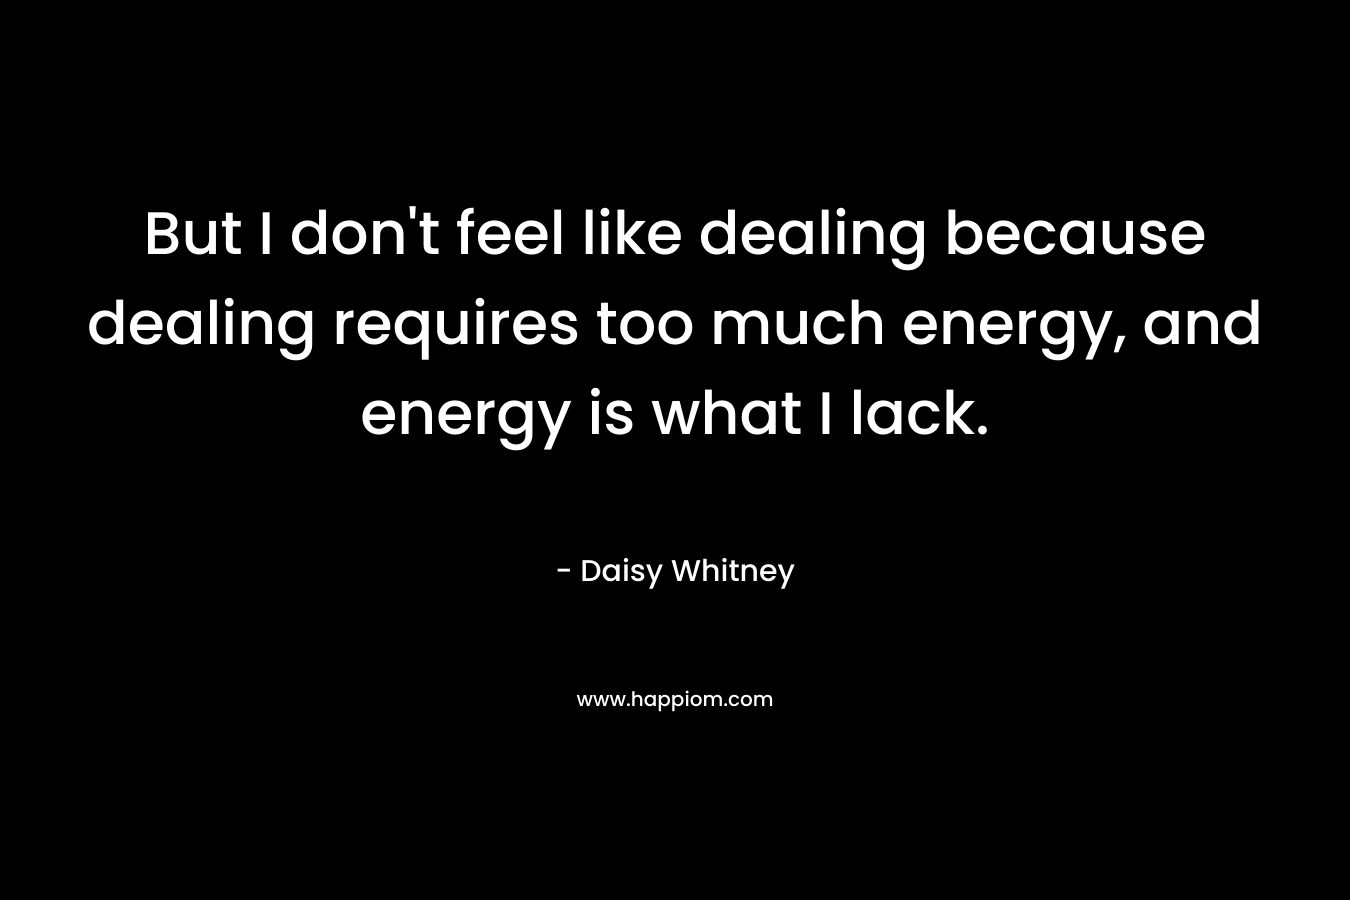 But I don’t feel like dealing because dealing requires too much energy, and energy is what I lack. – Daisy Whitney